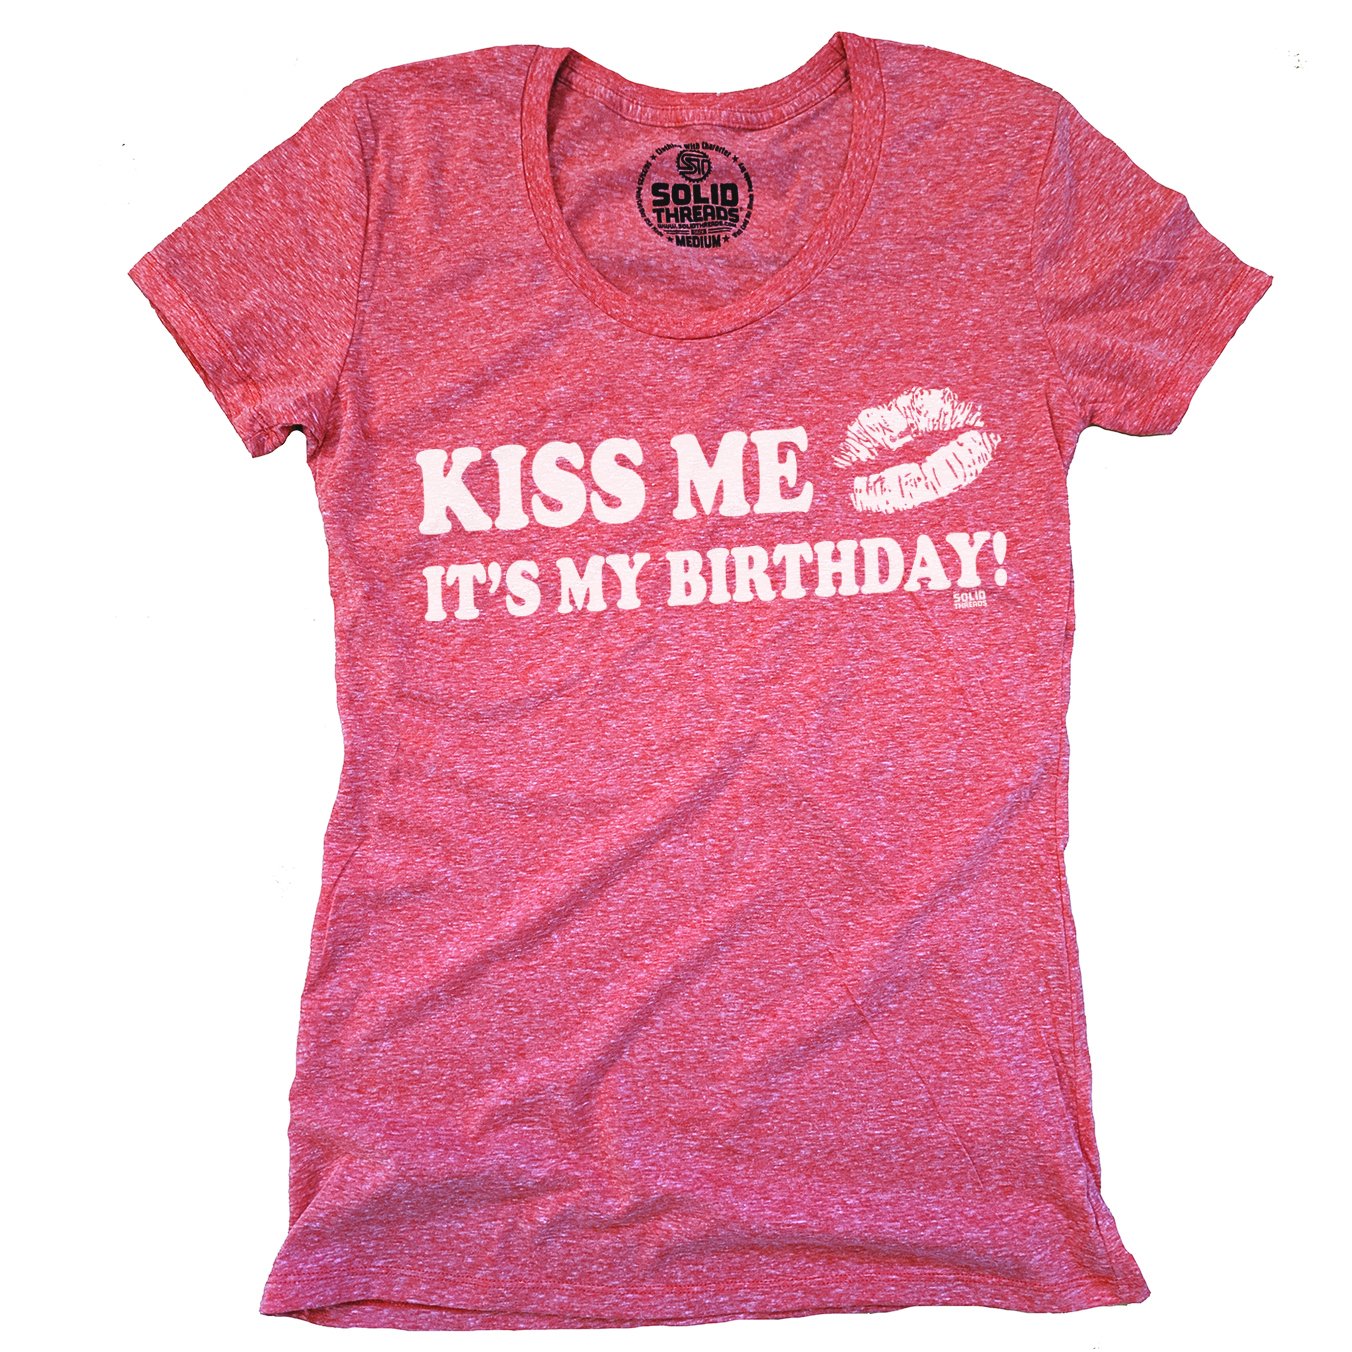 Women's Kiss Me It's My Birthday Cool Celebration Graphic T-Shirt | Funny Party Tee | Solid Threads